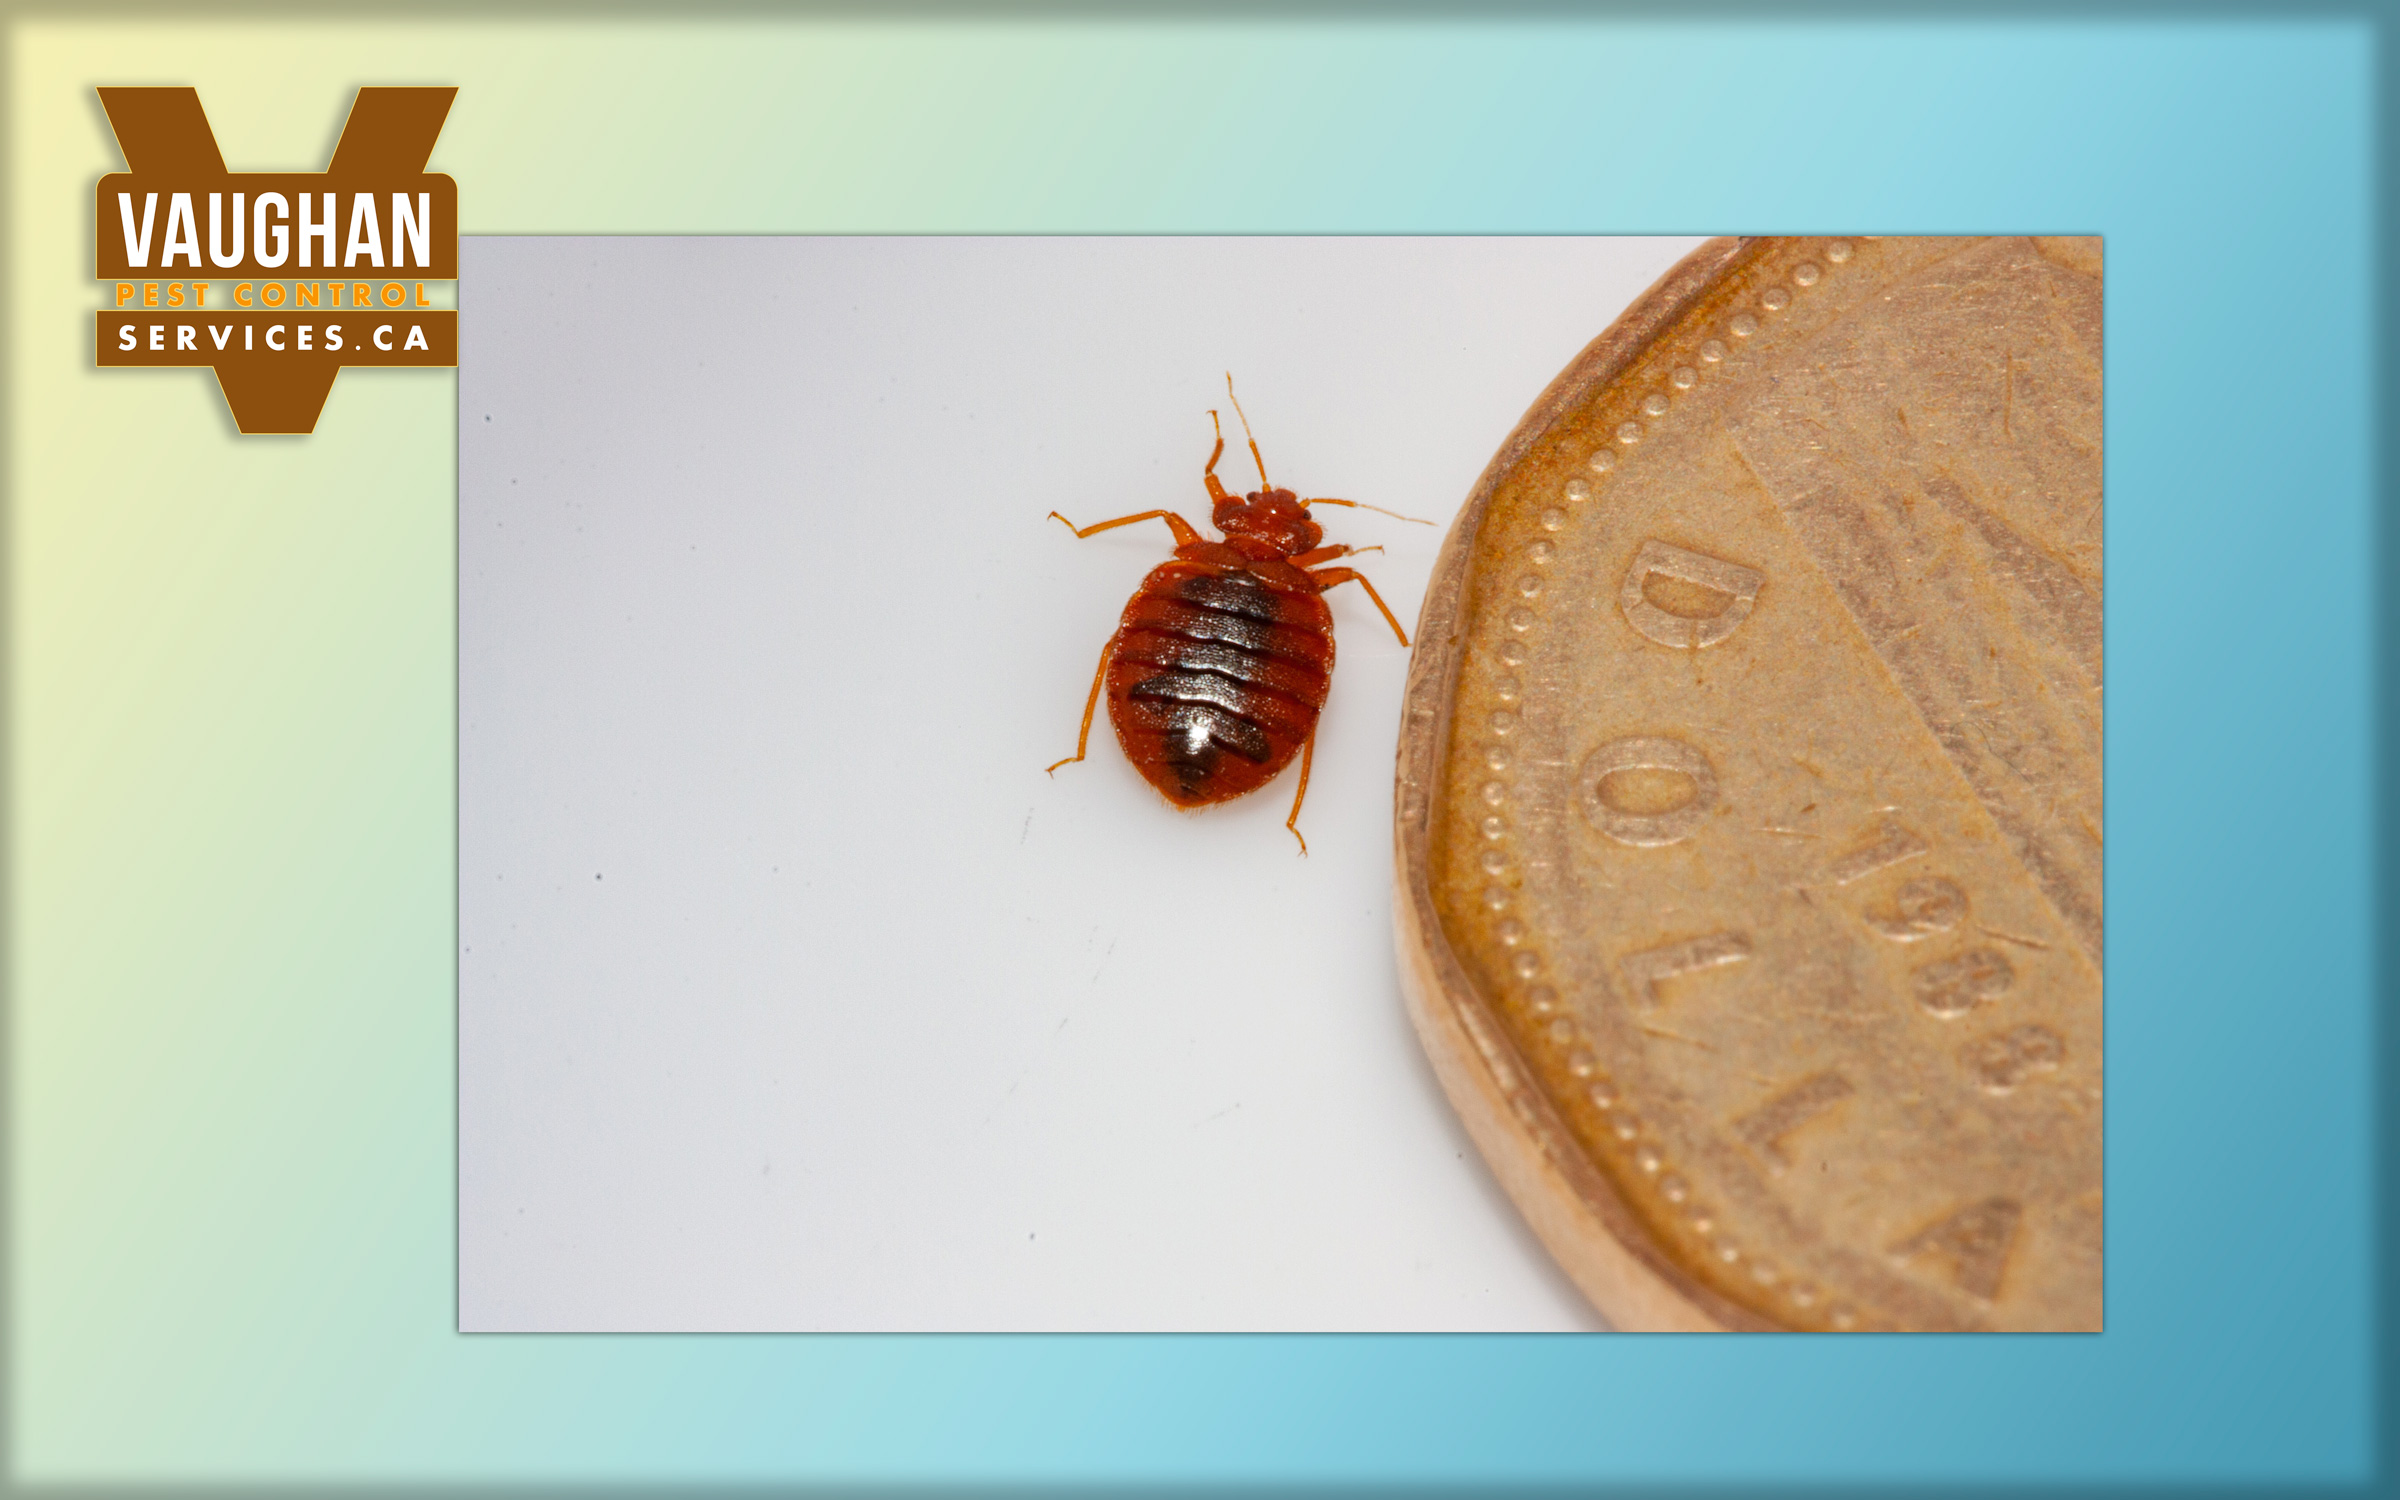 An adult bed Bug besides a dollar coin